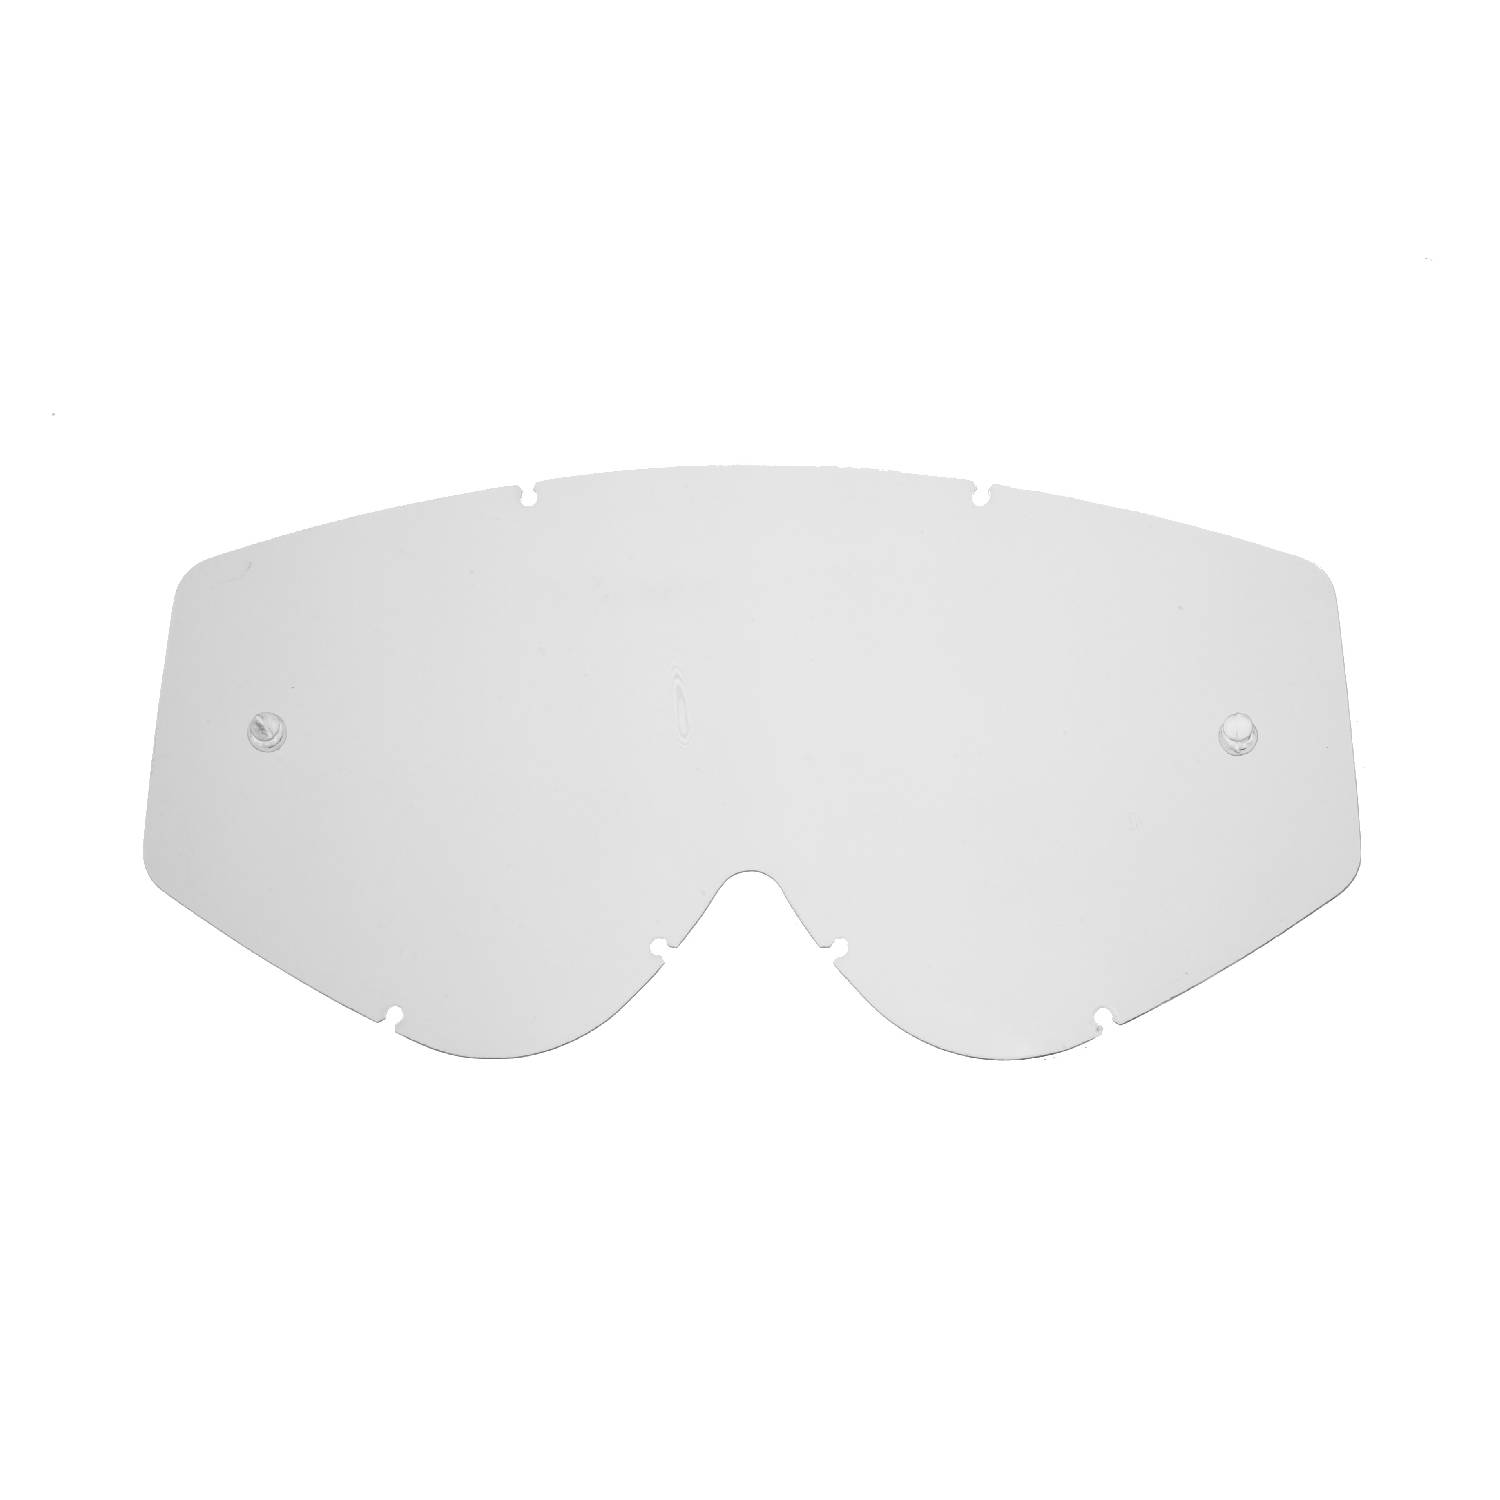 HZ GMZ SE-411107-HZ clear replacement lenses for goggles